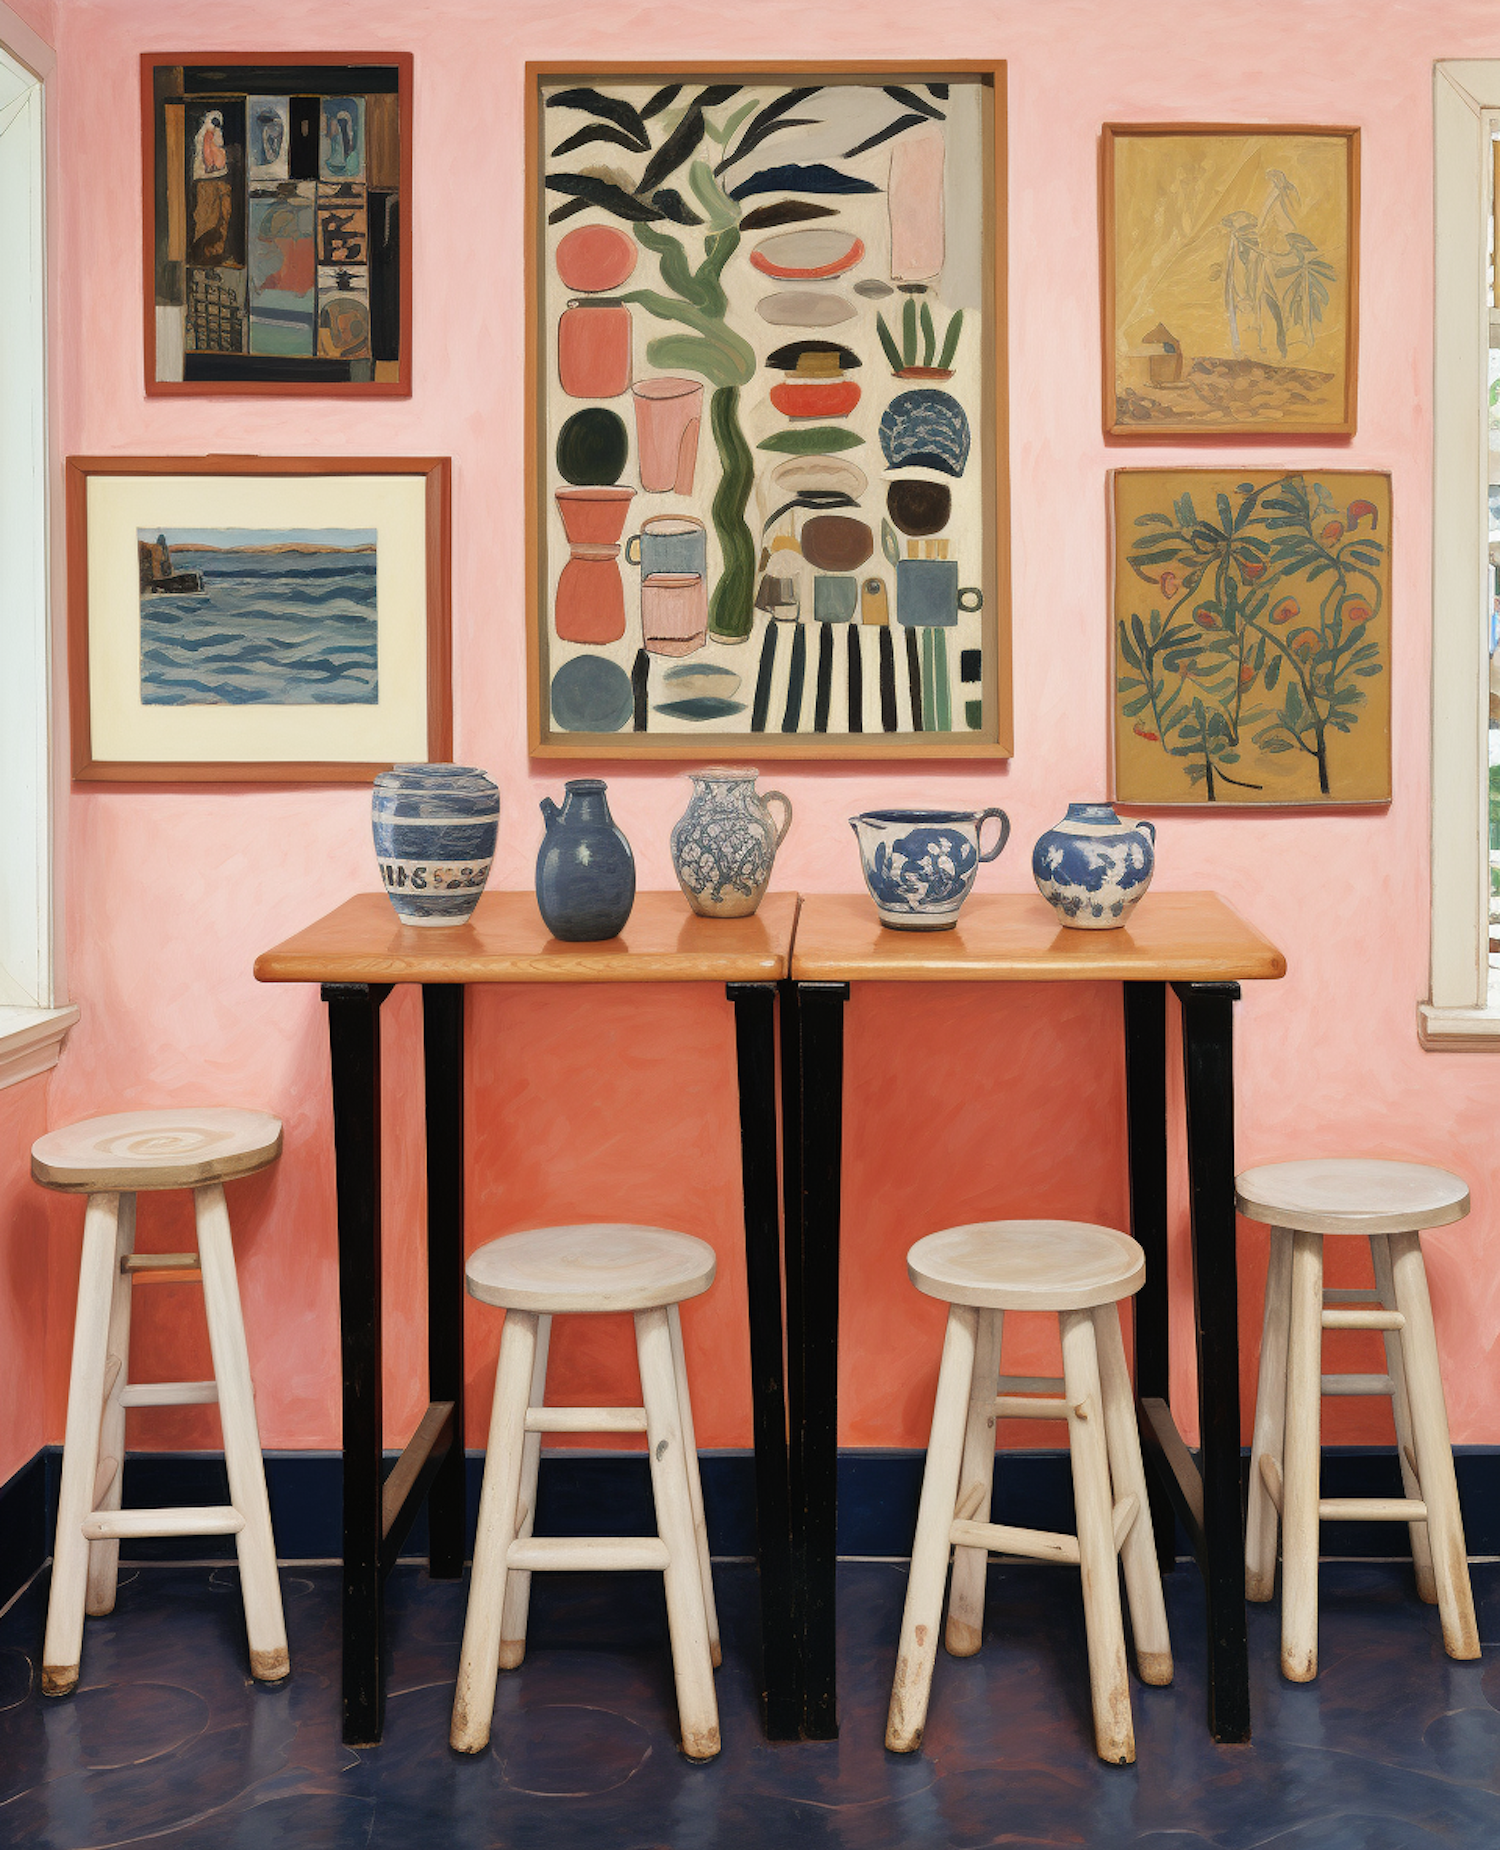 Artistic Tranquility: The Eclectic Gallery Home